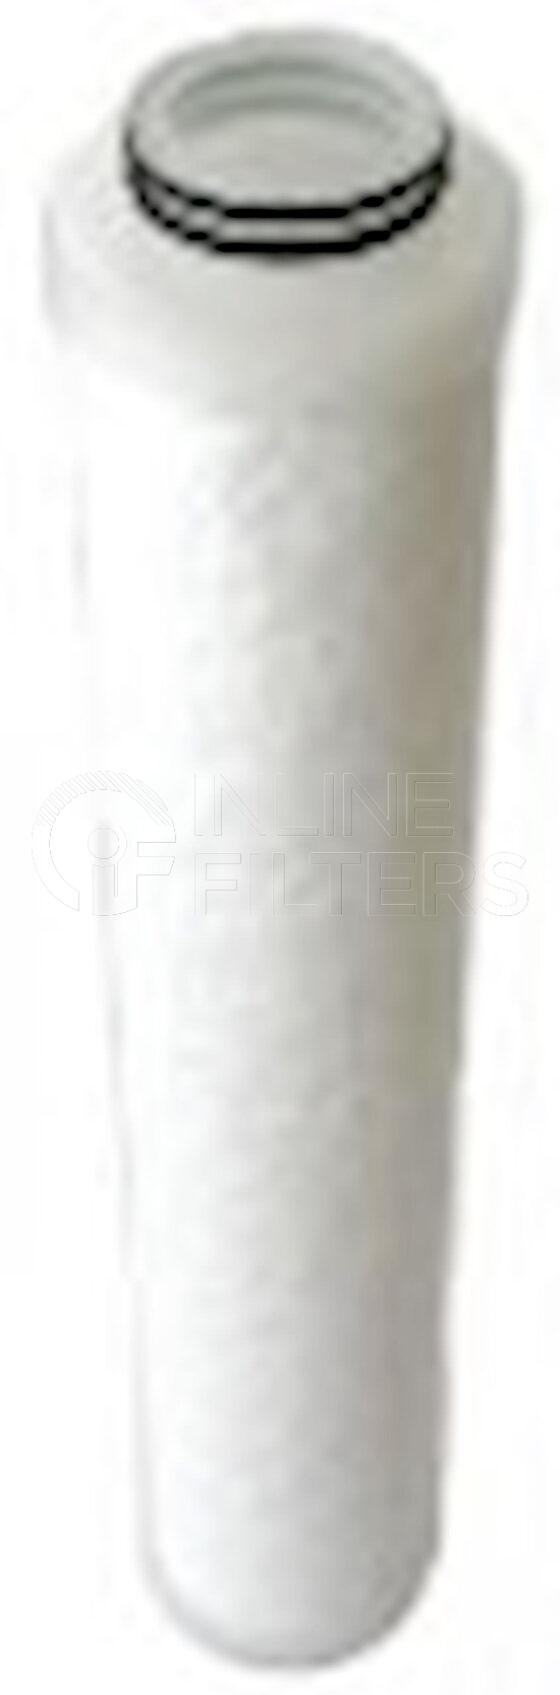 Inline FW90114. Water Filter Product – Brand Specific Inline – Undefined Product Water filter product